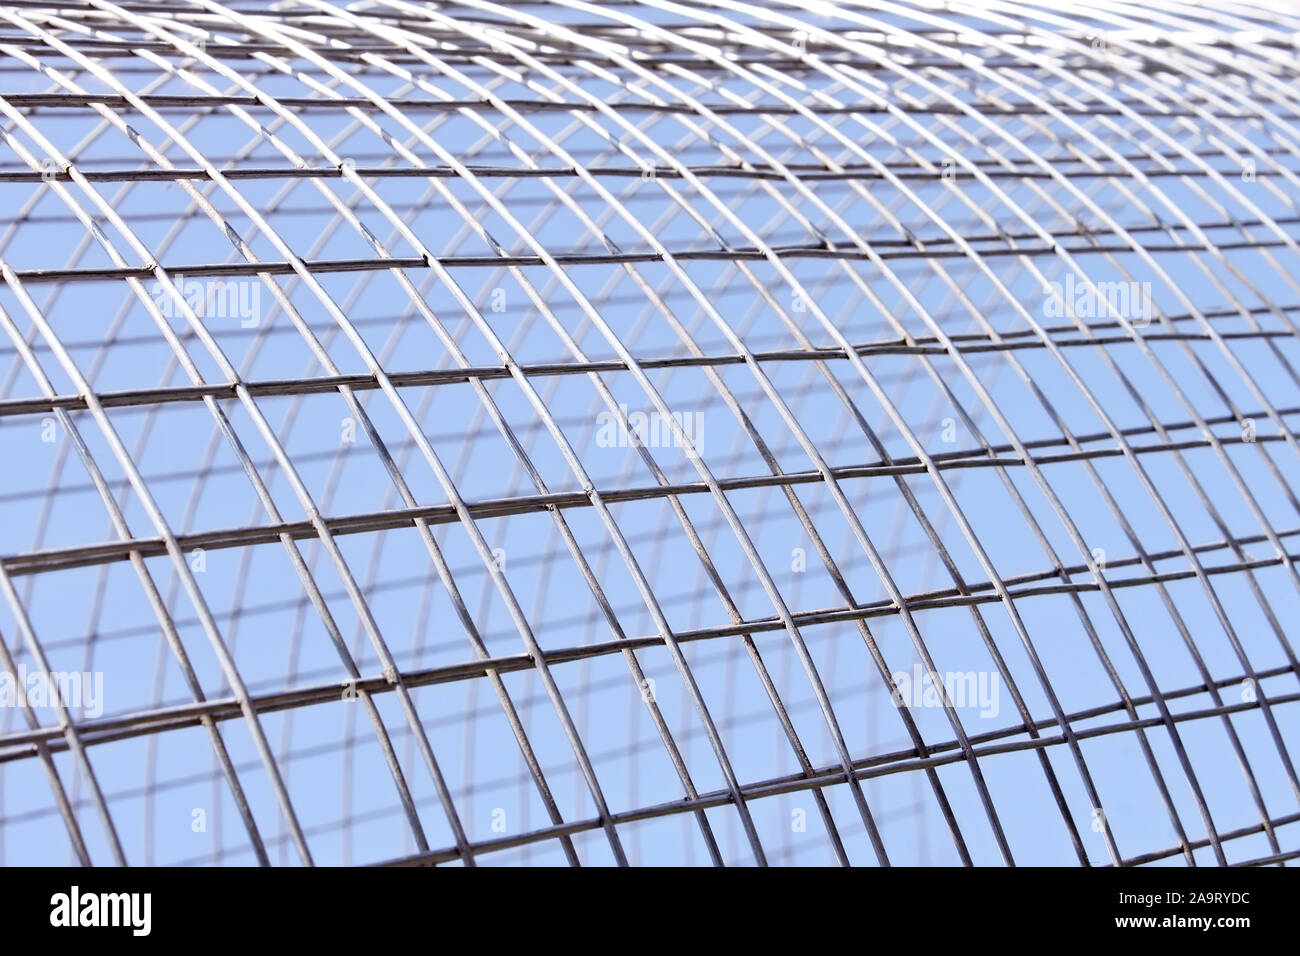 Metal grid of white alloy shines in bright sunlight on the blue sky background Stock Photo